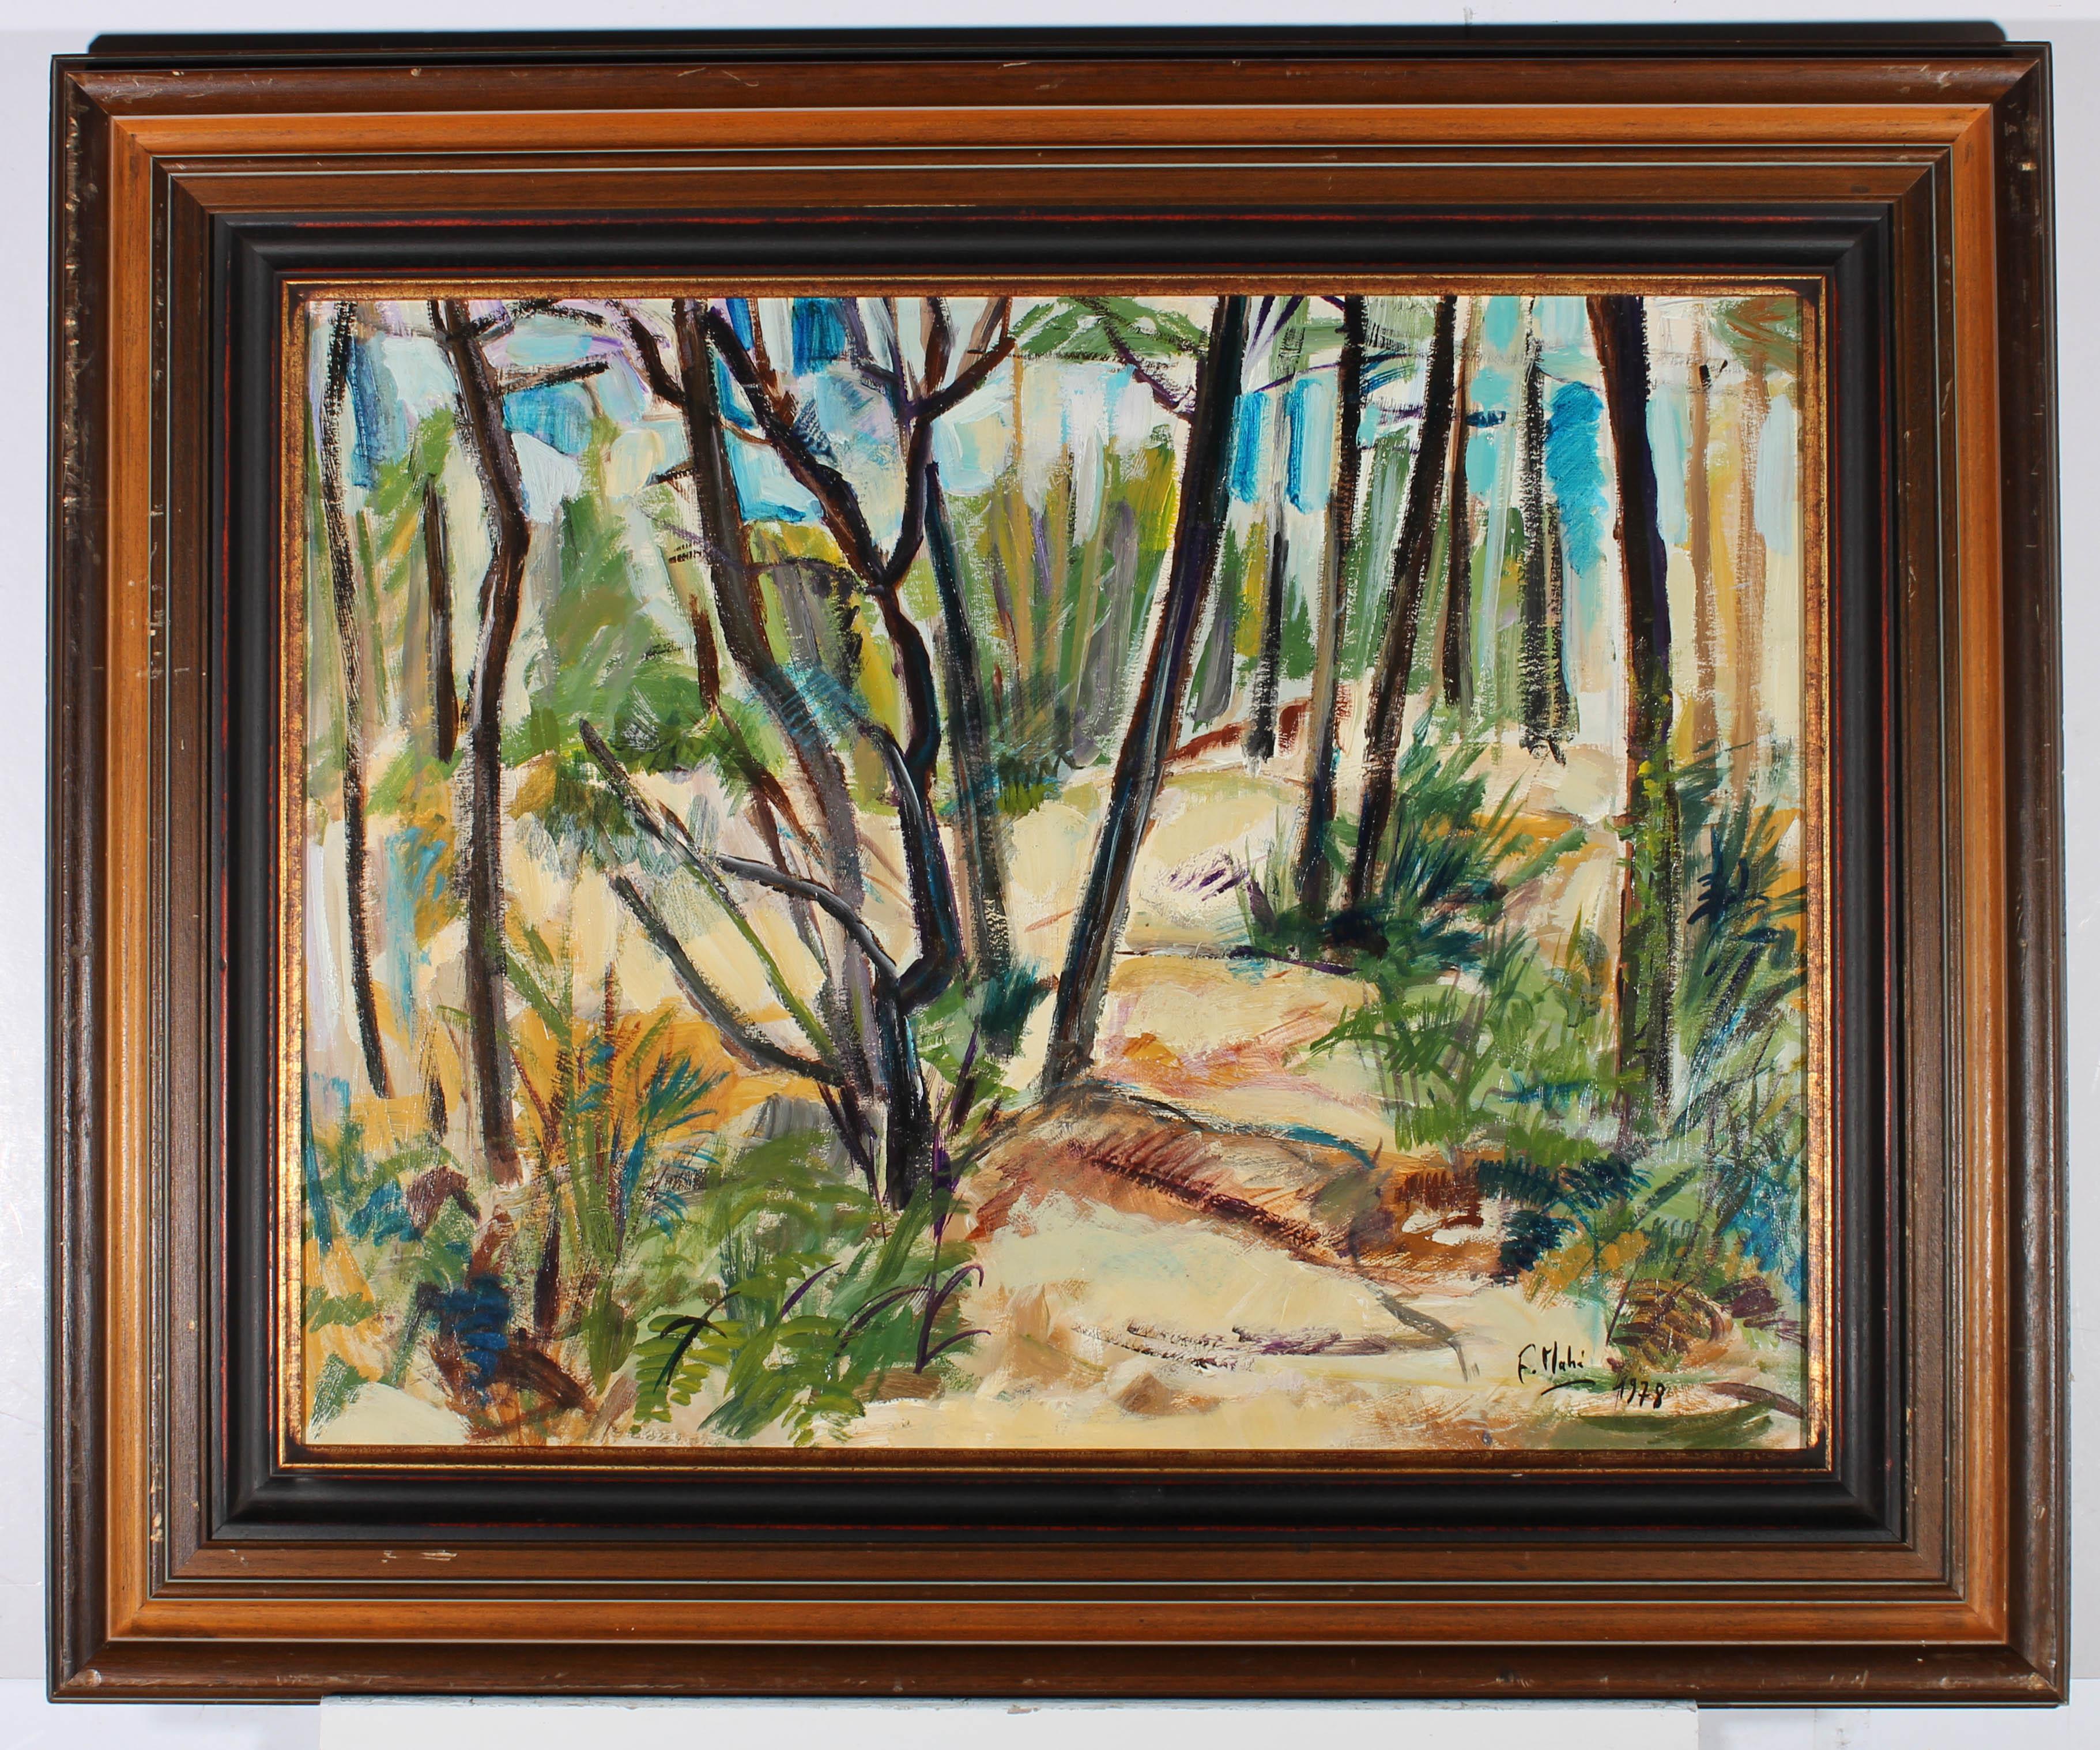 A captivating French School, study of a woodland landscape, painted in a bold gestural manner. The composition is indistinctly signed and dated to the lower right-hand corner. Handsomely presented in an antique style wooden frame, with decorative